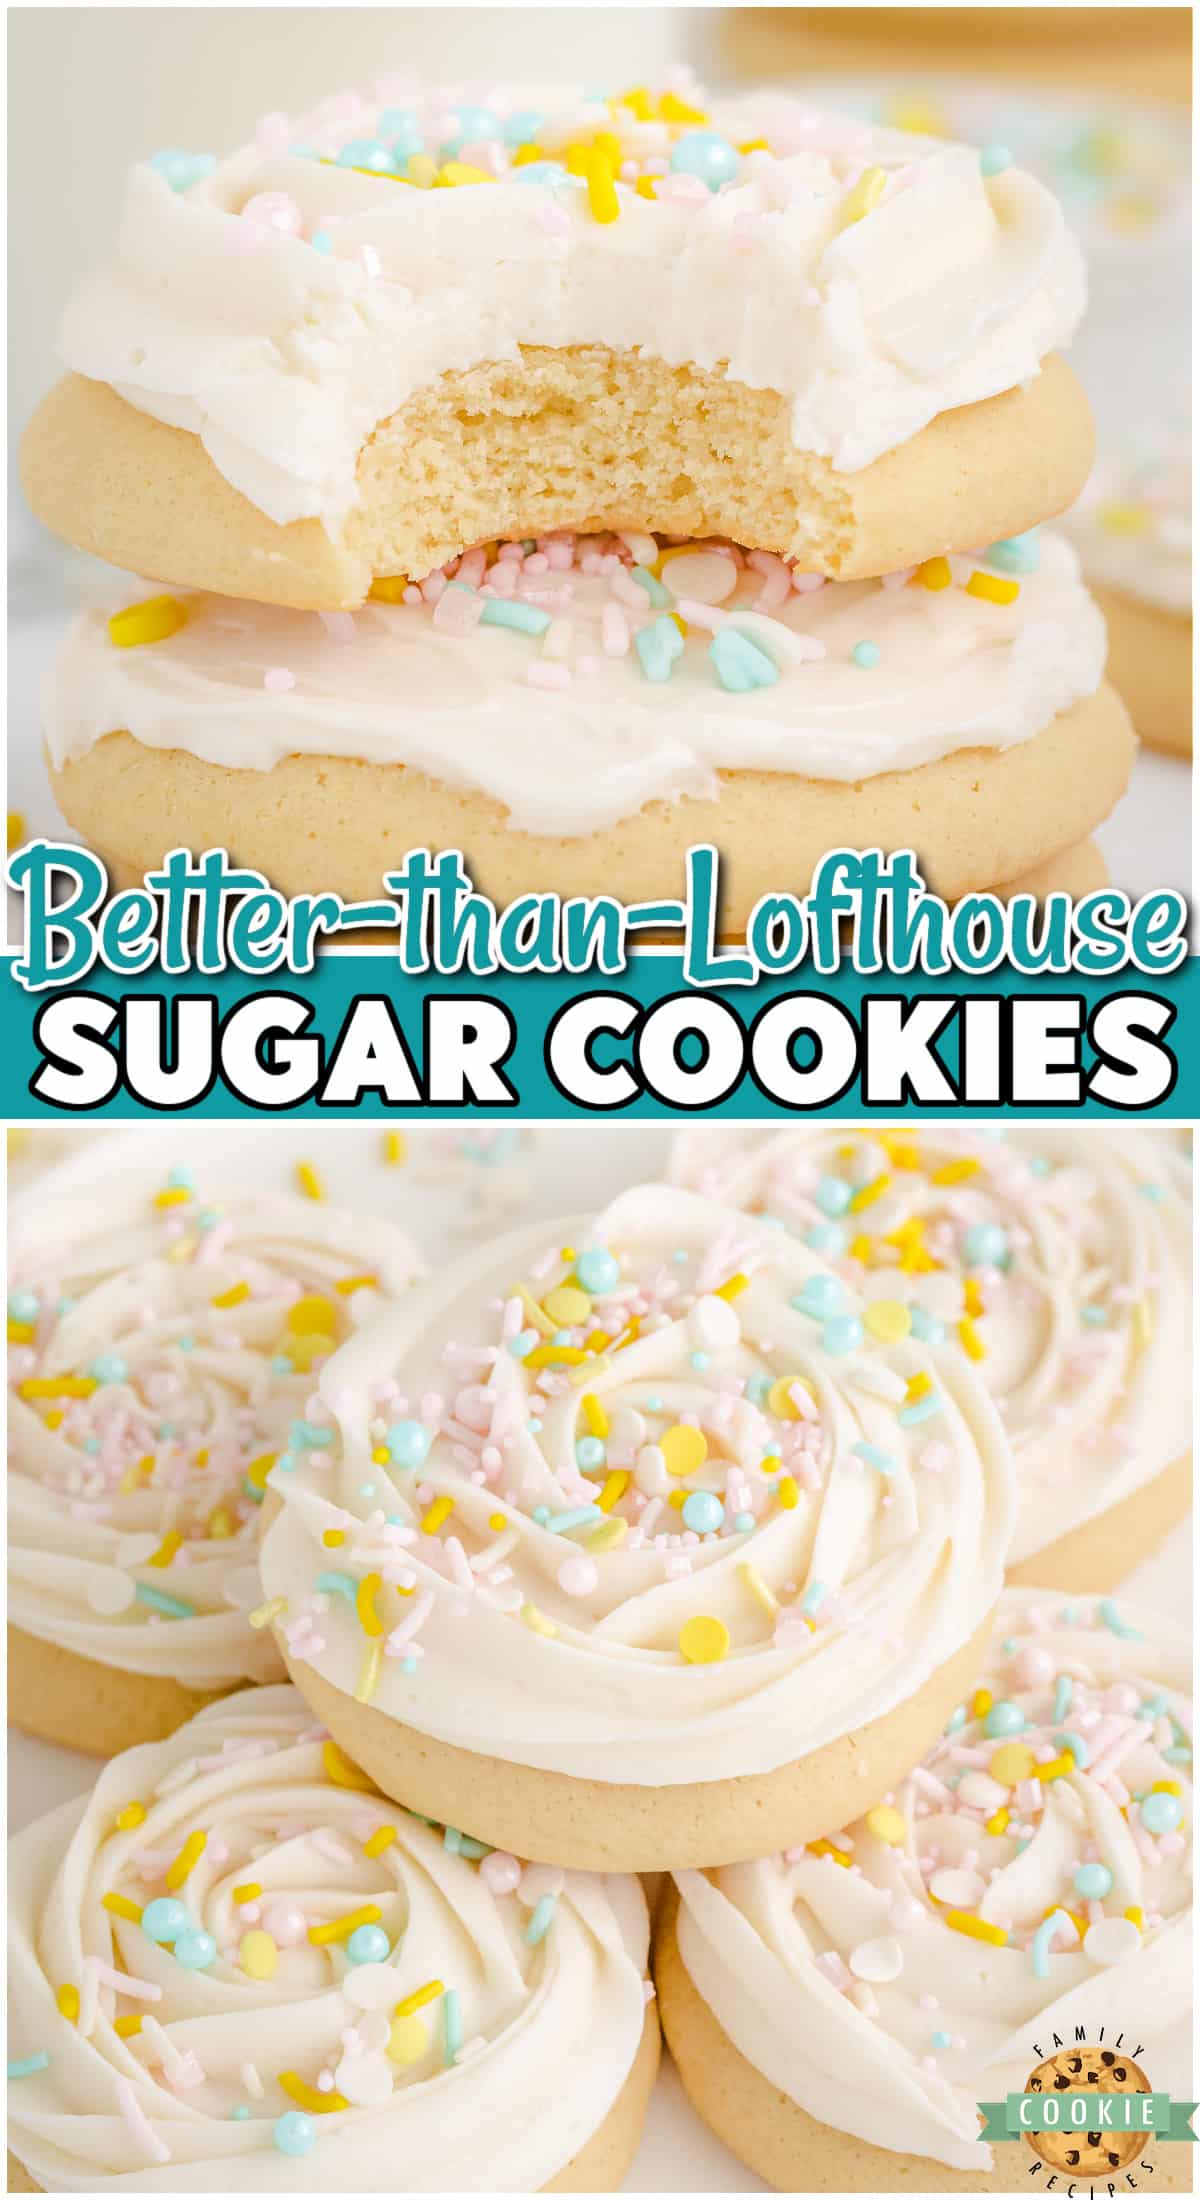 Super Soft Sugar Cookies will soon be your new go-to sugar cookie recipe! Soft, buttery cookies with lovely flavor just melt in your mouth!